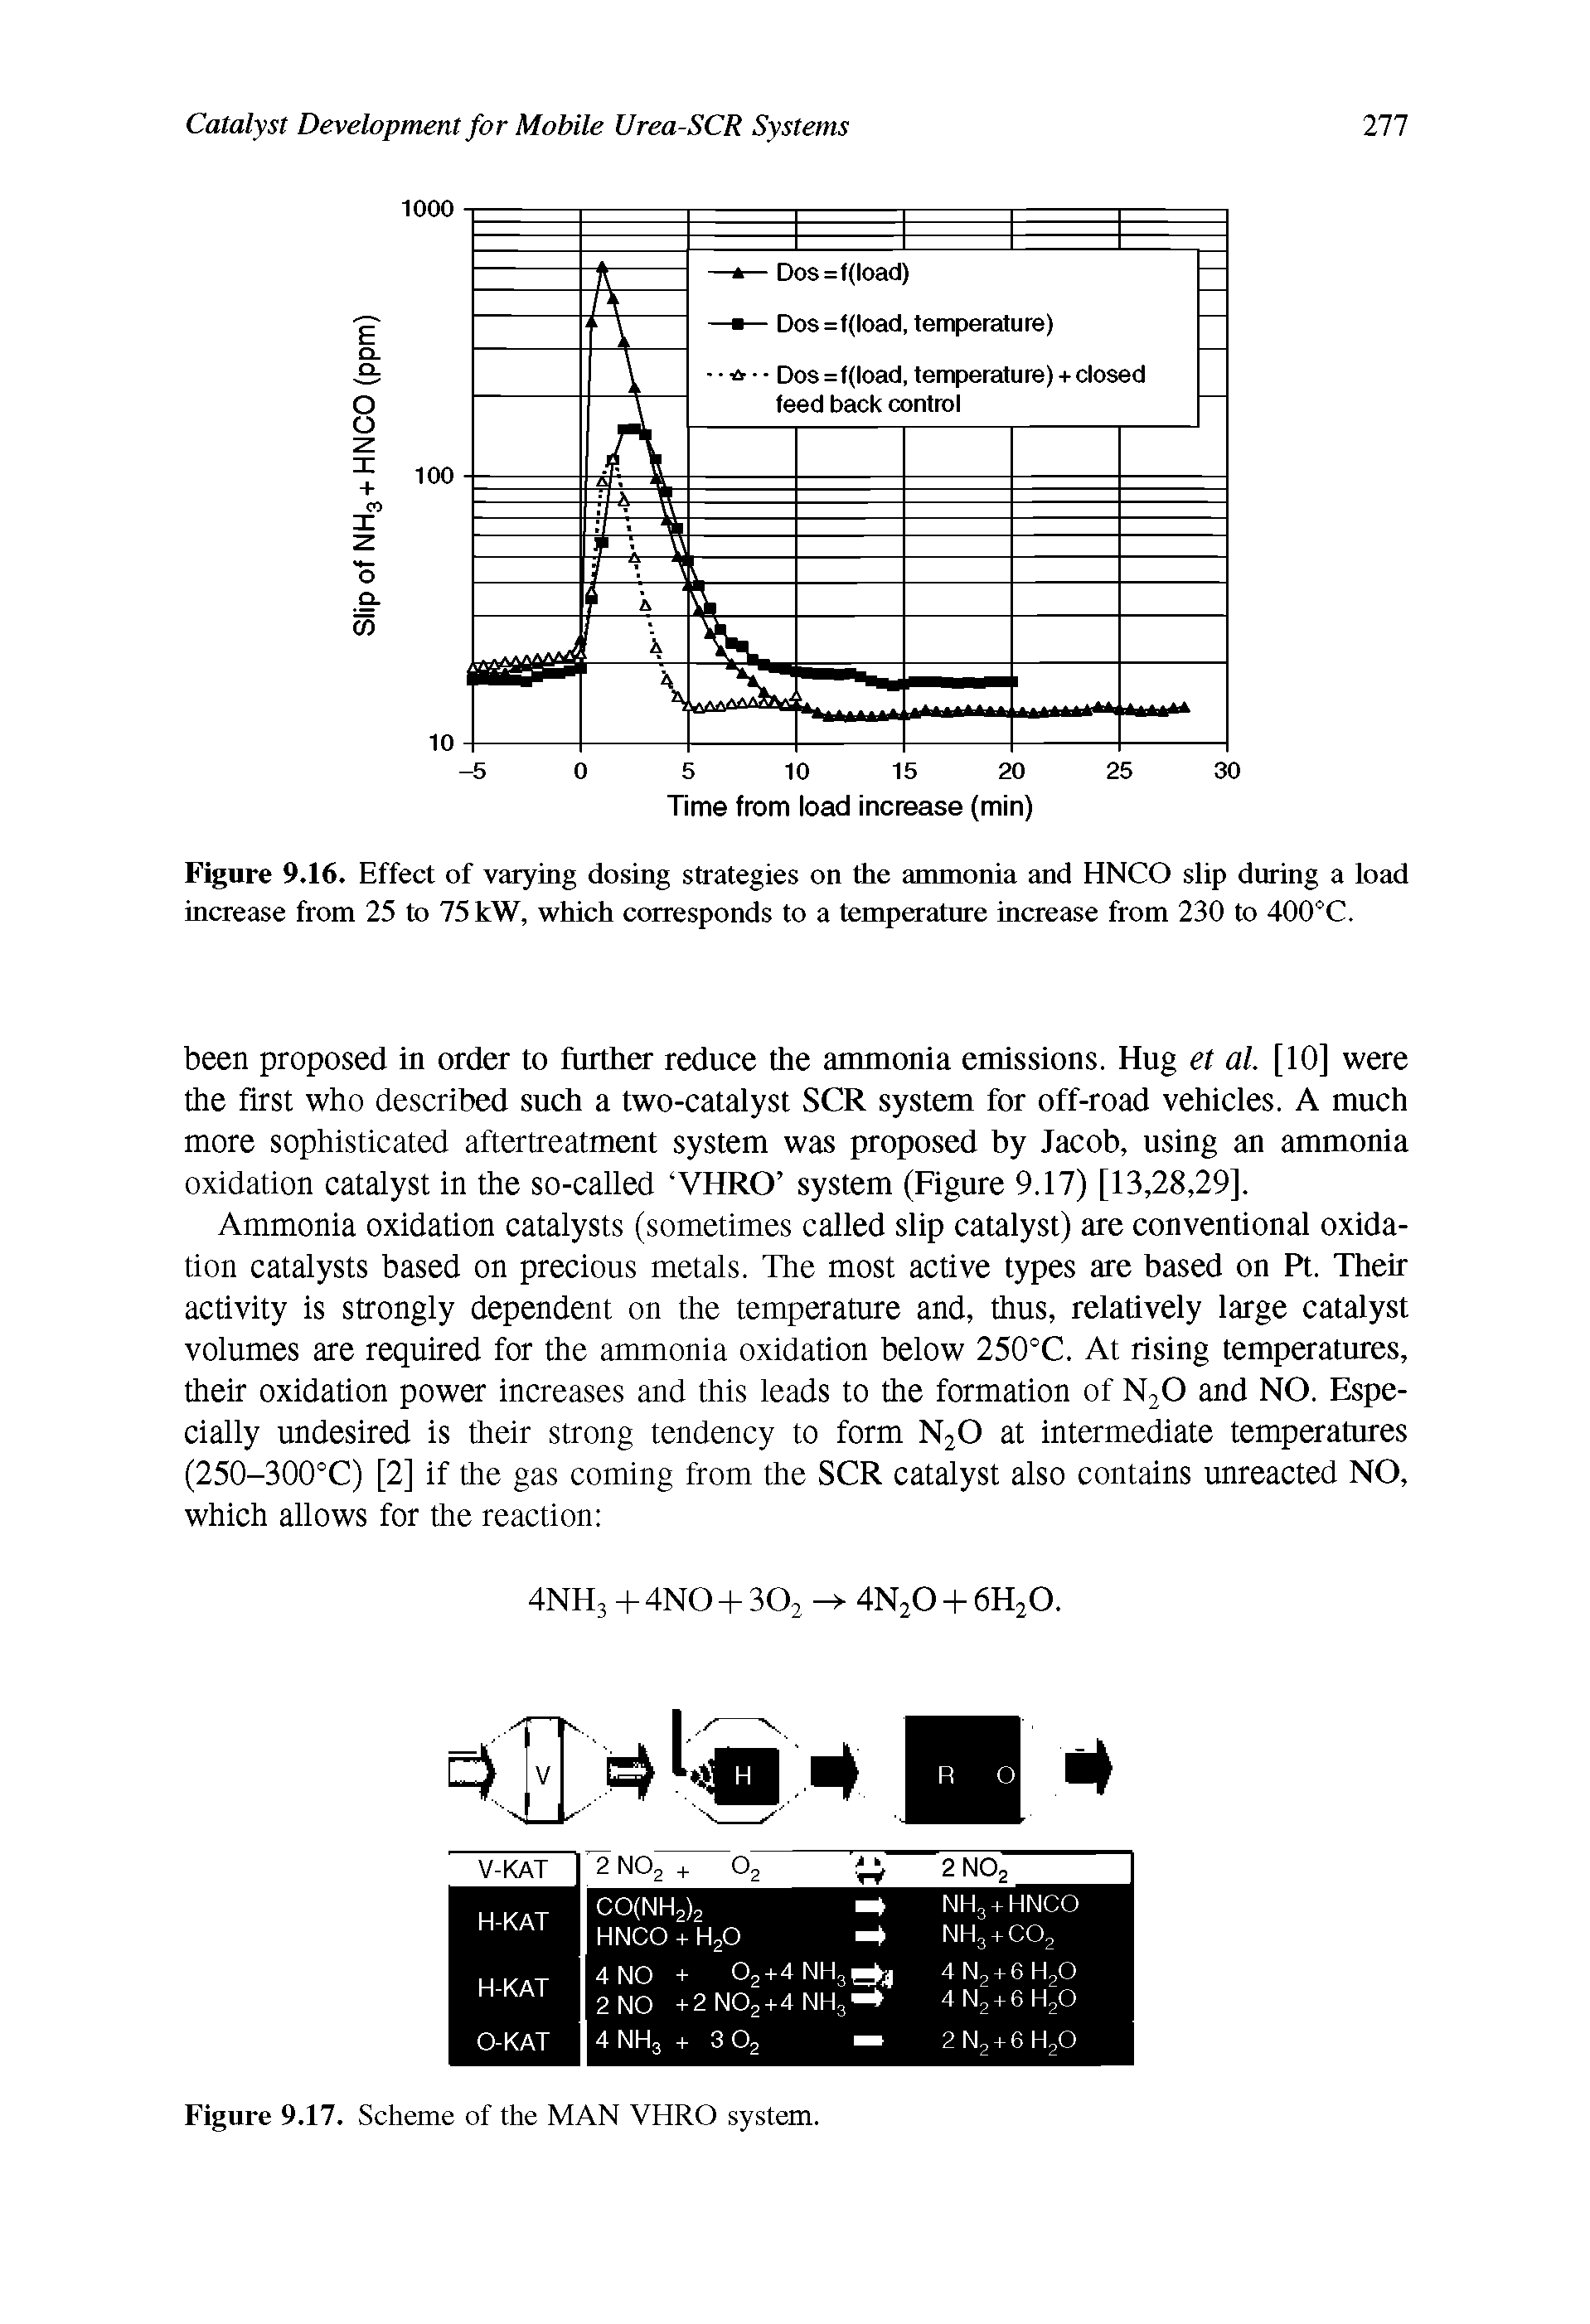 Figure 9.16. Effect of varying dosing strategies on the ammonia and HNCO slip during a load increase from 25 to 75 kW, which corresponds to a temperature increase from 230 to 400°C.